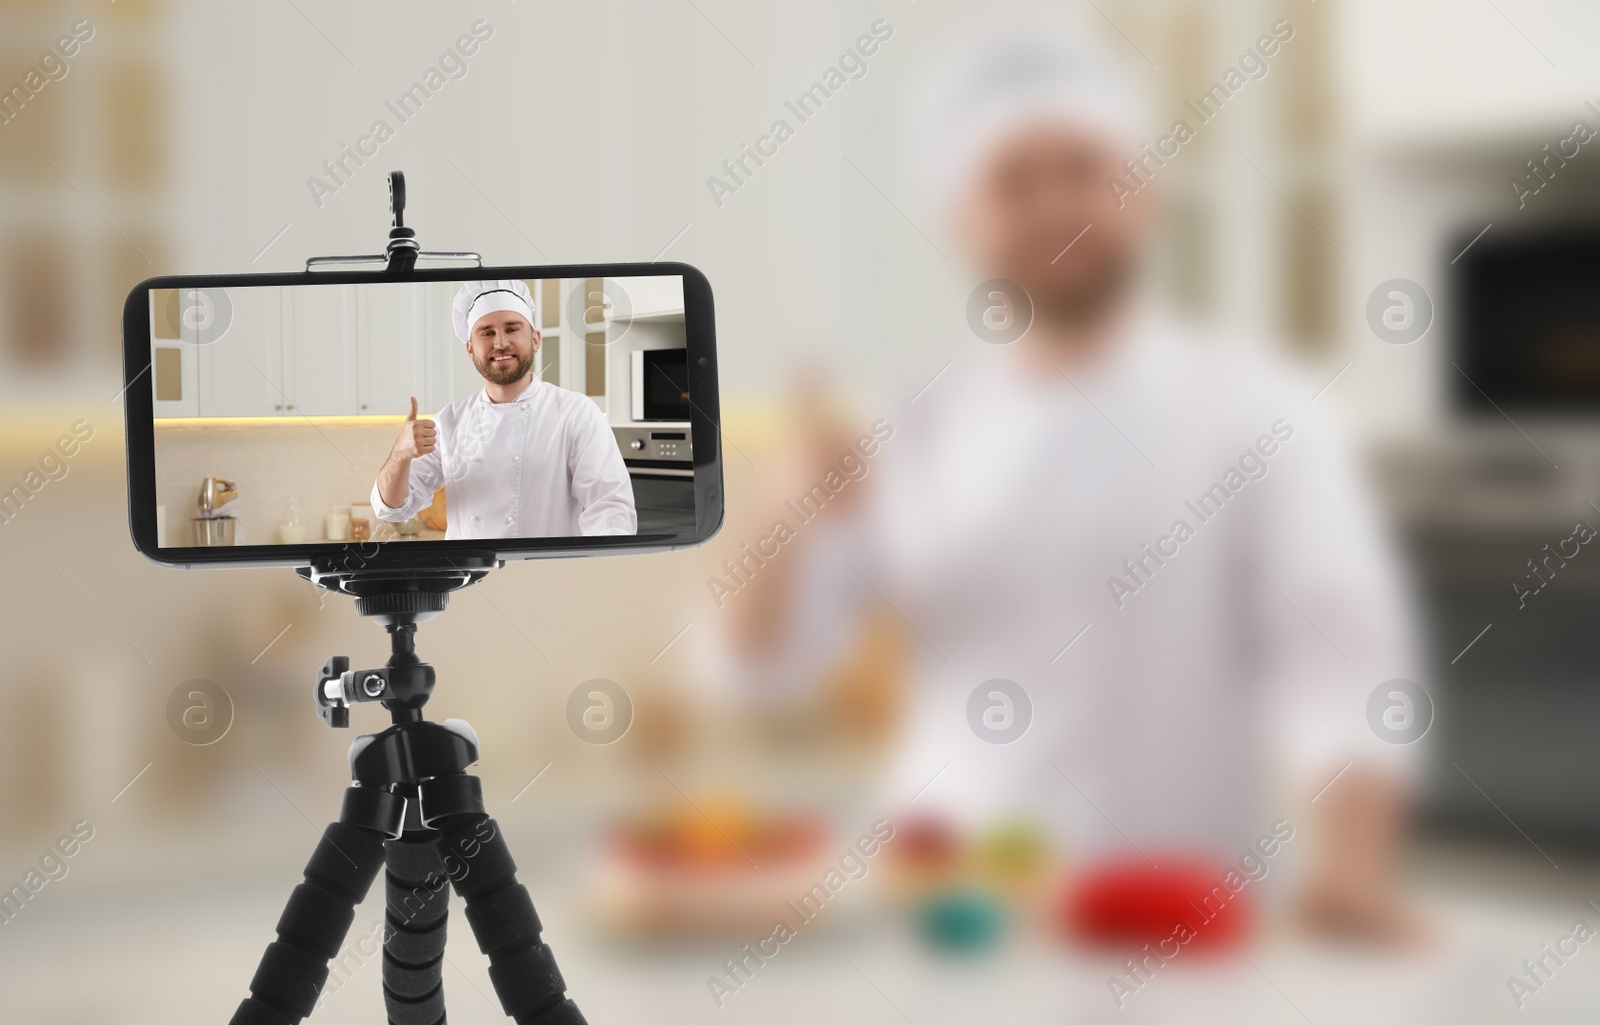 Image of Cook showing thumb up gesture in kitchen, selective focus on smartphone display